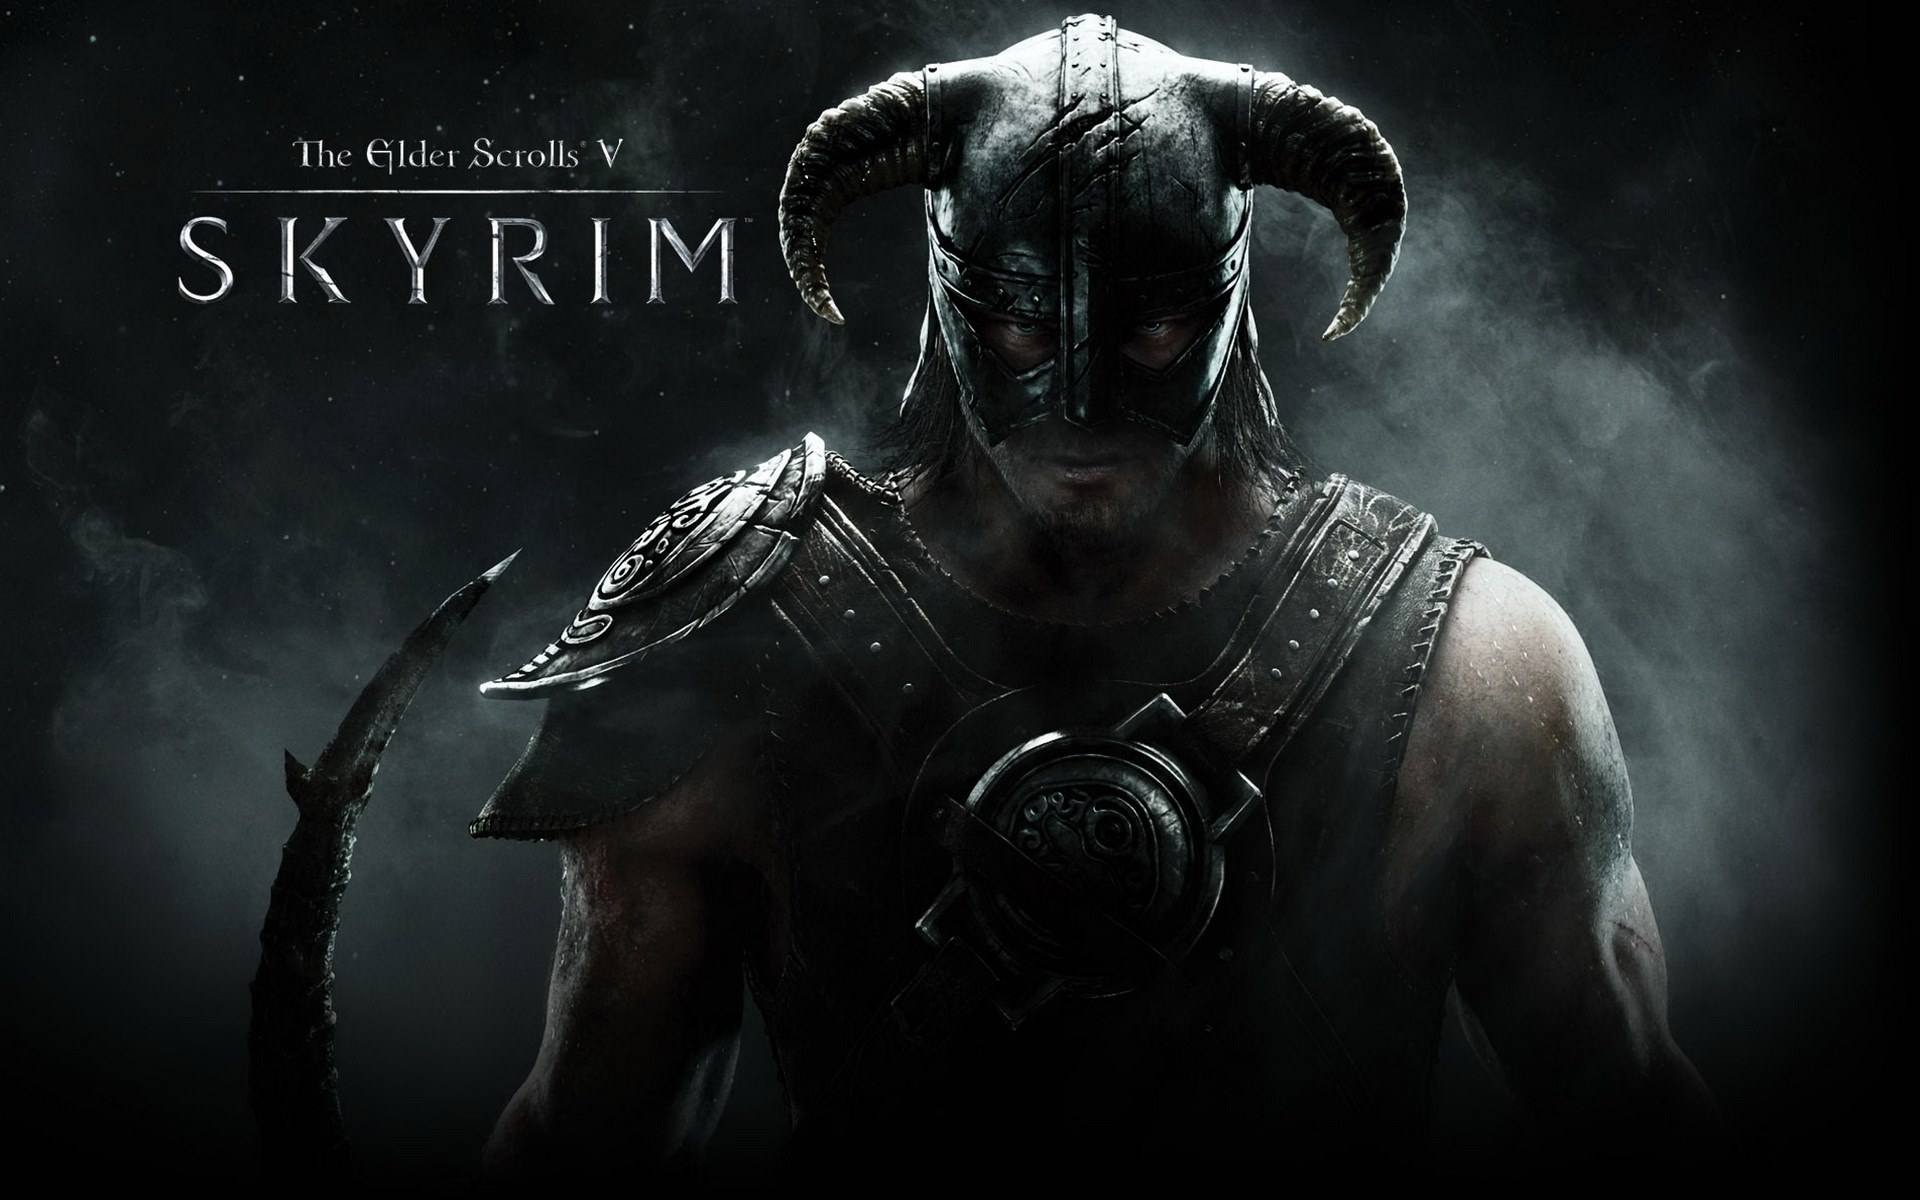 The Elder Scrolls V: Skyrim Review: An Immersive Role-Playing Game For The Switch